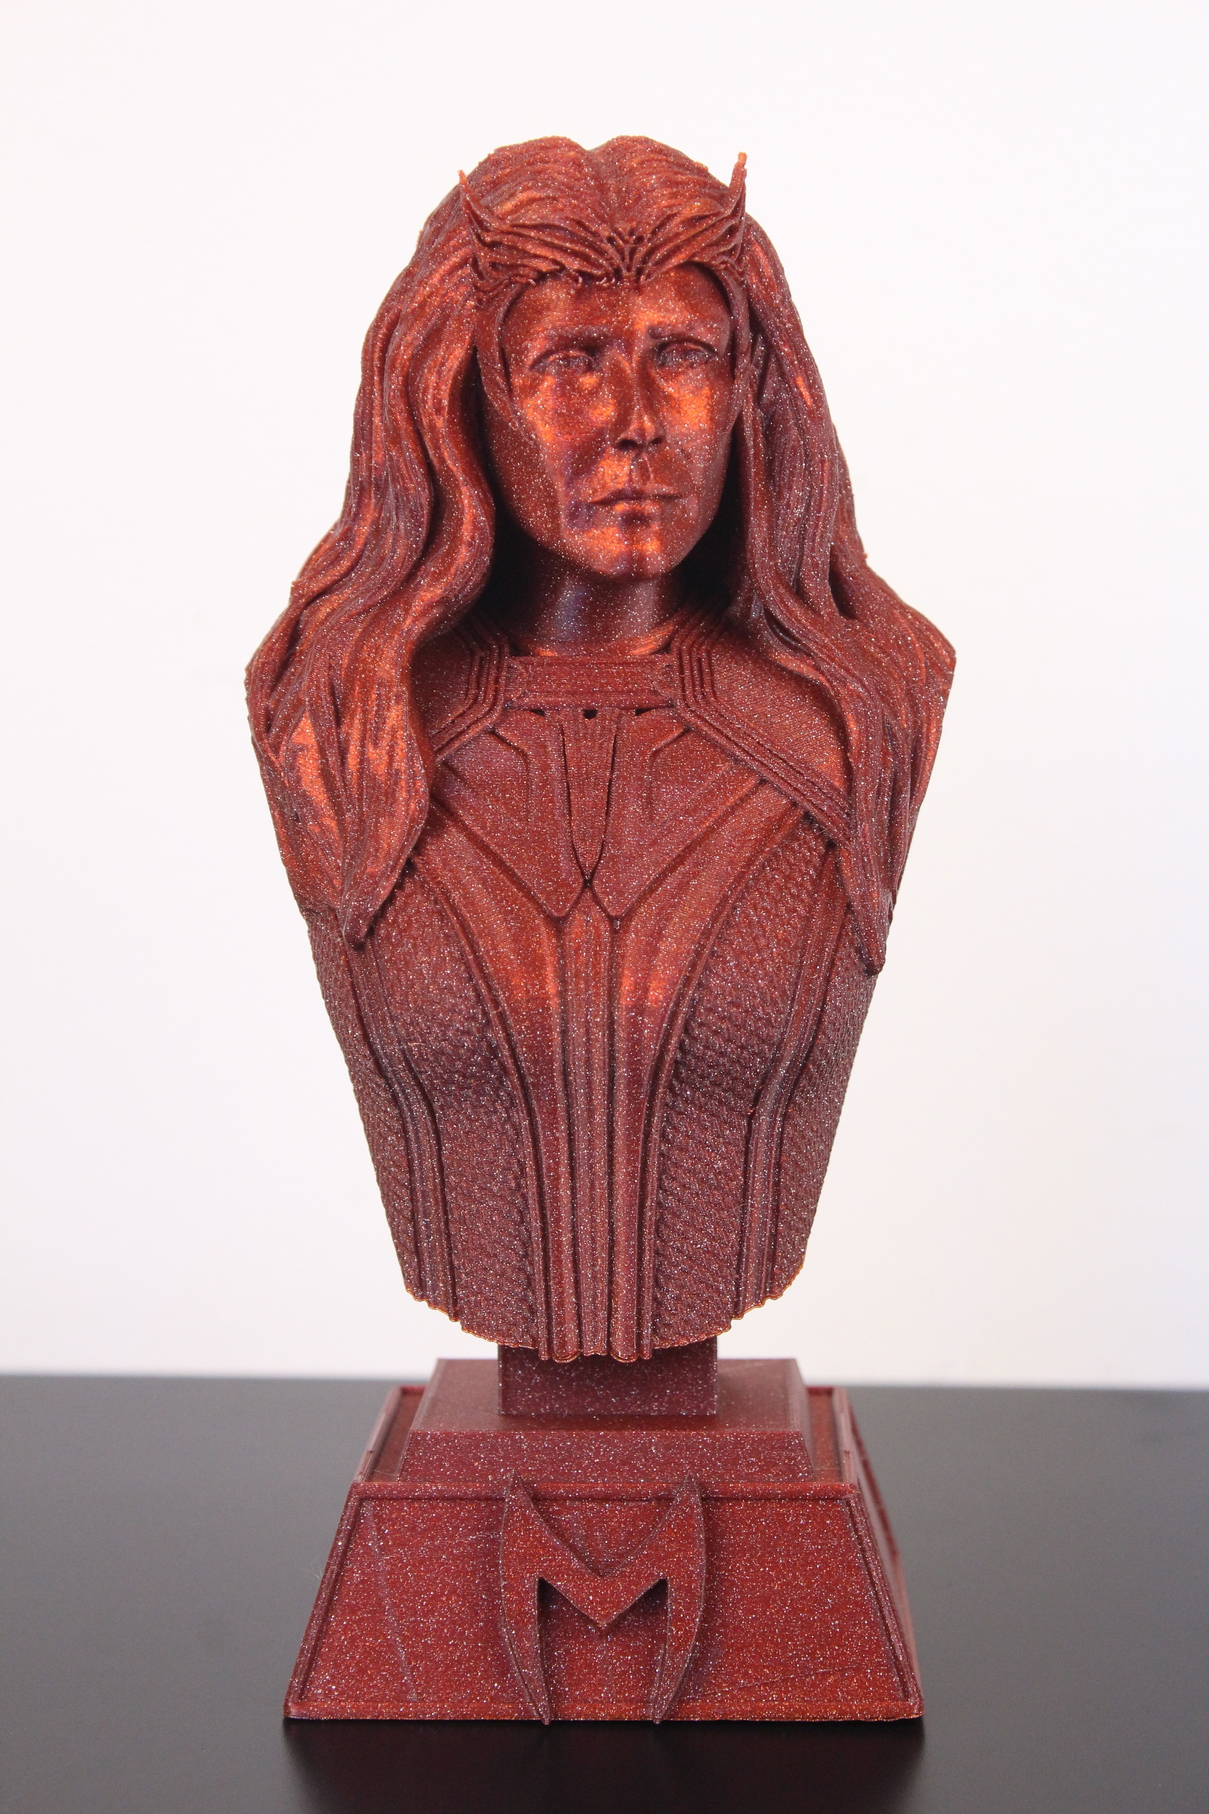 Scarlet Witch printed on the Voxelab Aries 3 | Voxelab Aries Review: A Worthy Upgrade for the Aquila?